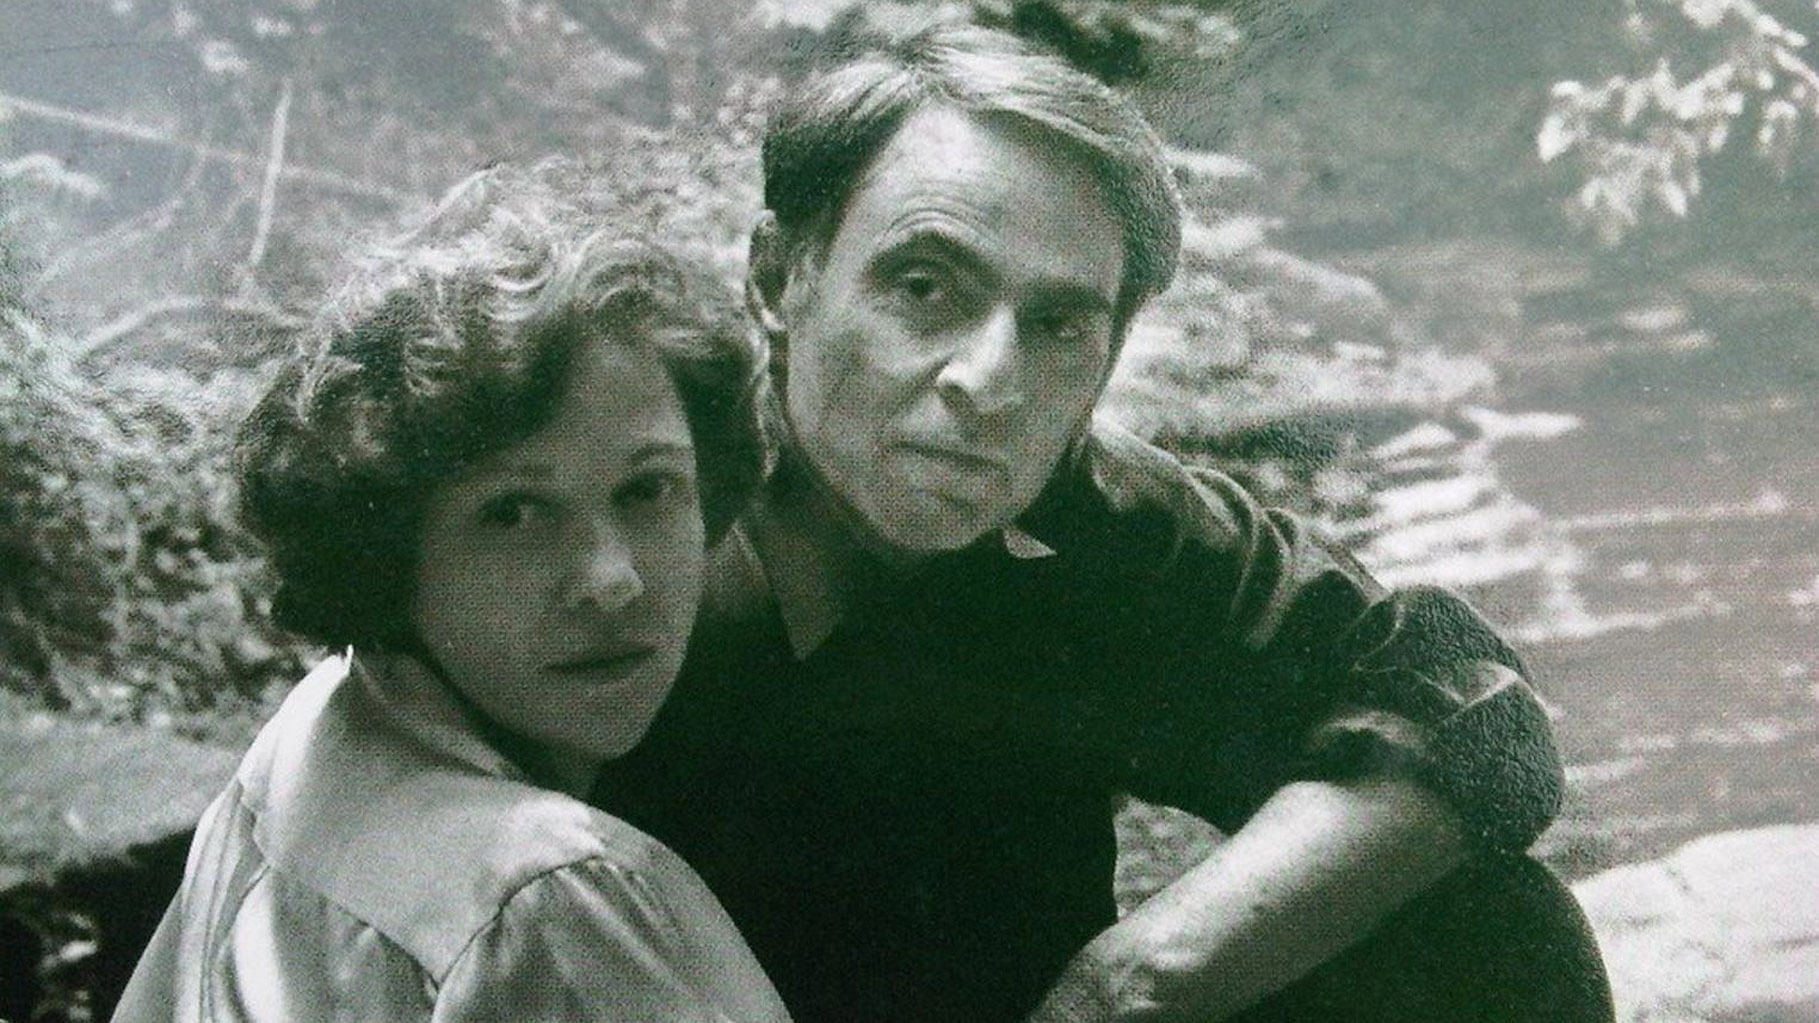 Dr. Carl Sagan and Ann Druyan in the mid 80s. (Photo Courtesy: Astropular’s <a href="https://twitter.com/Astropular">Twitter Page</a>)